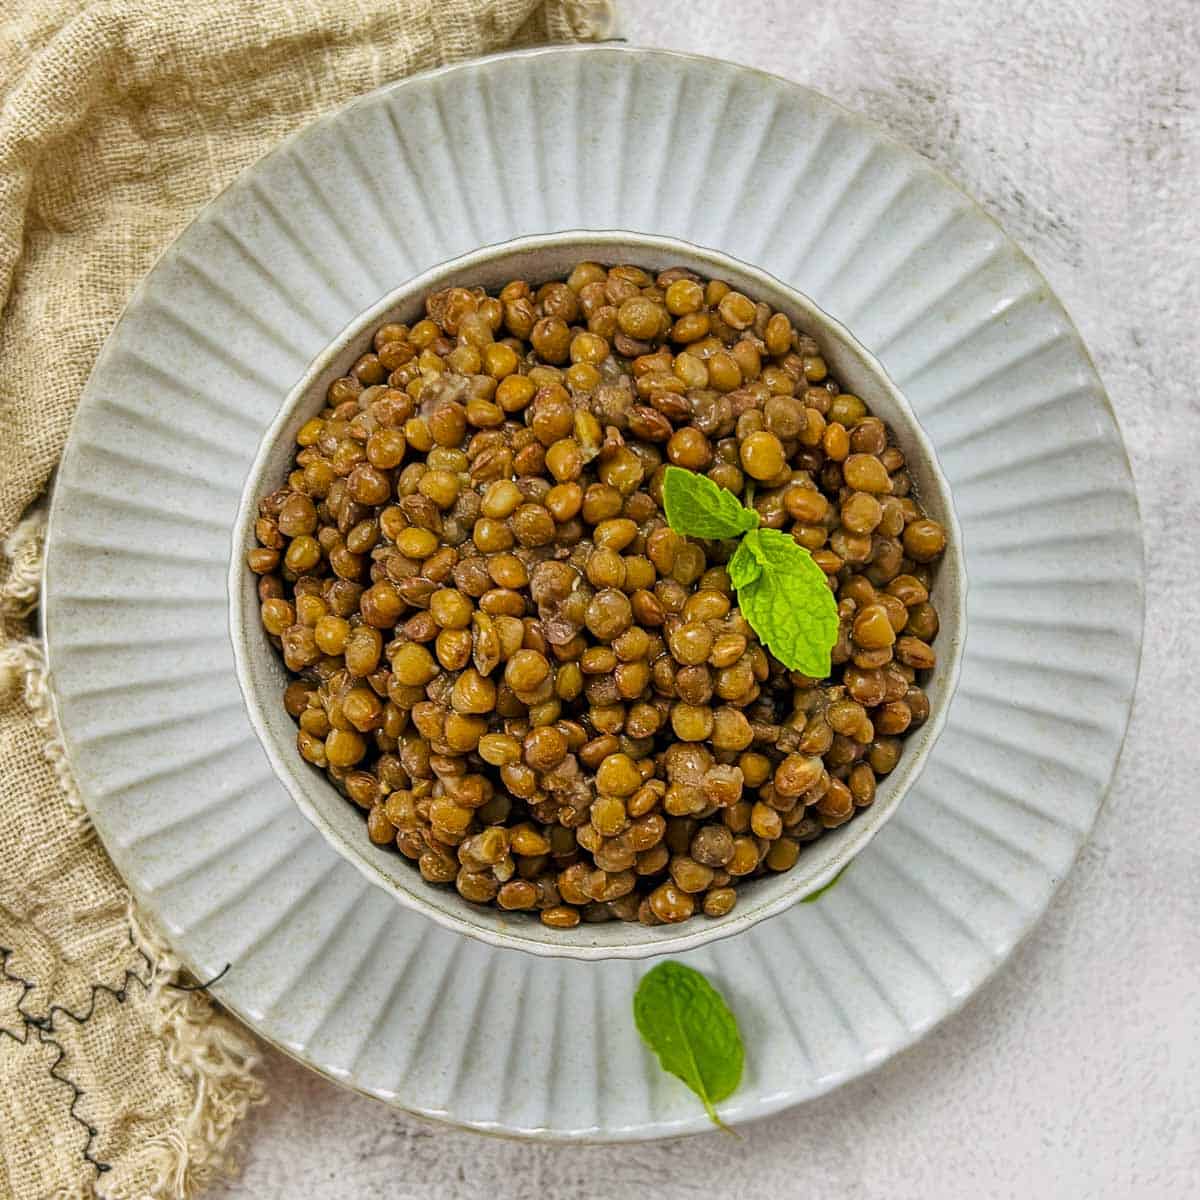 Cooked brown lentils topped with a mint leaf.